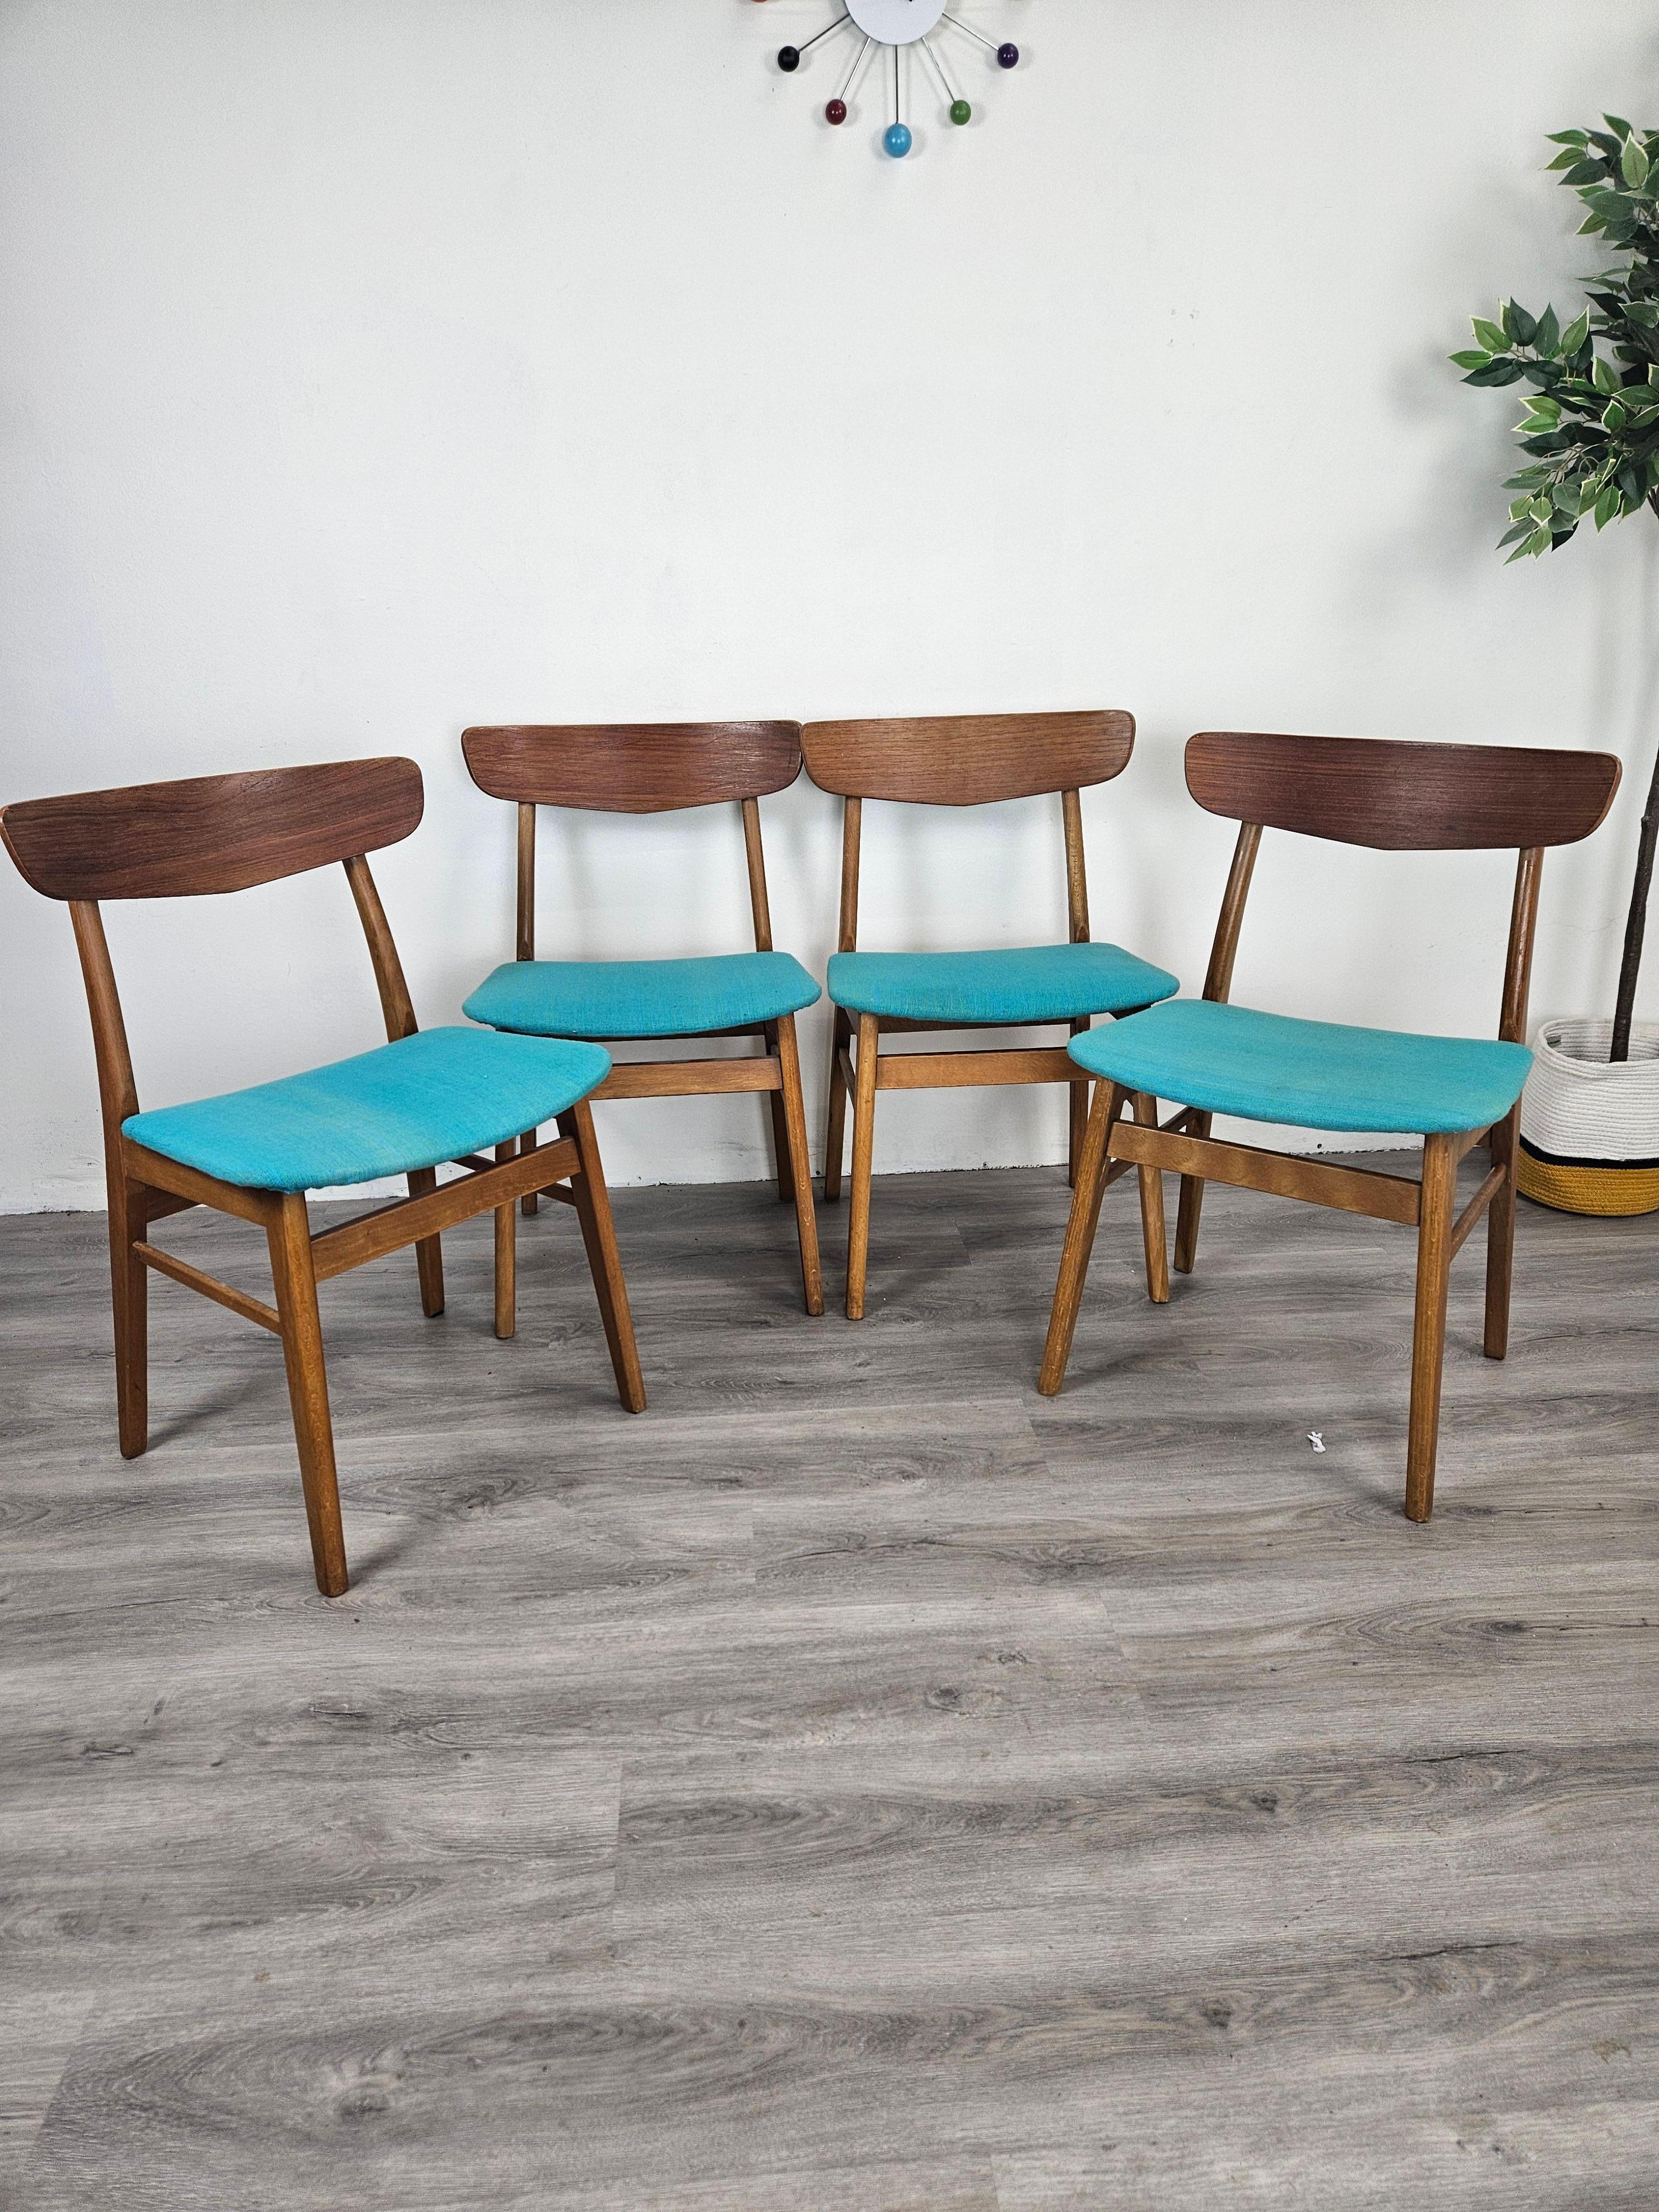 Set of 4 Findahls Mobelfabrik Dining Chairs Danish Teak In Fair Condition For Sale In Frederick, MD